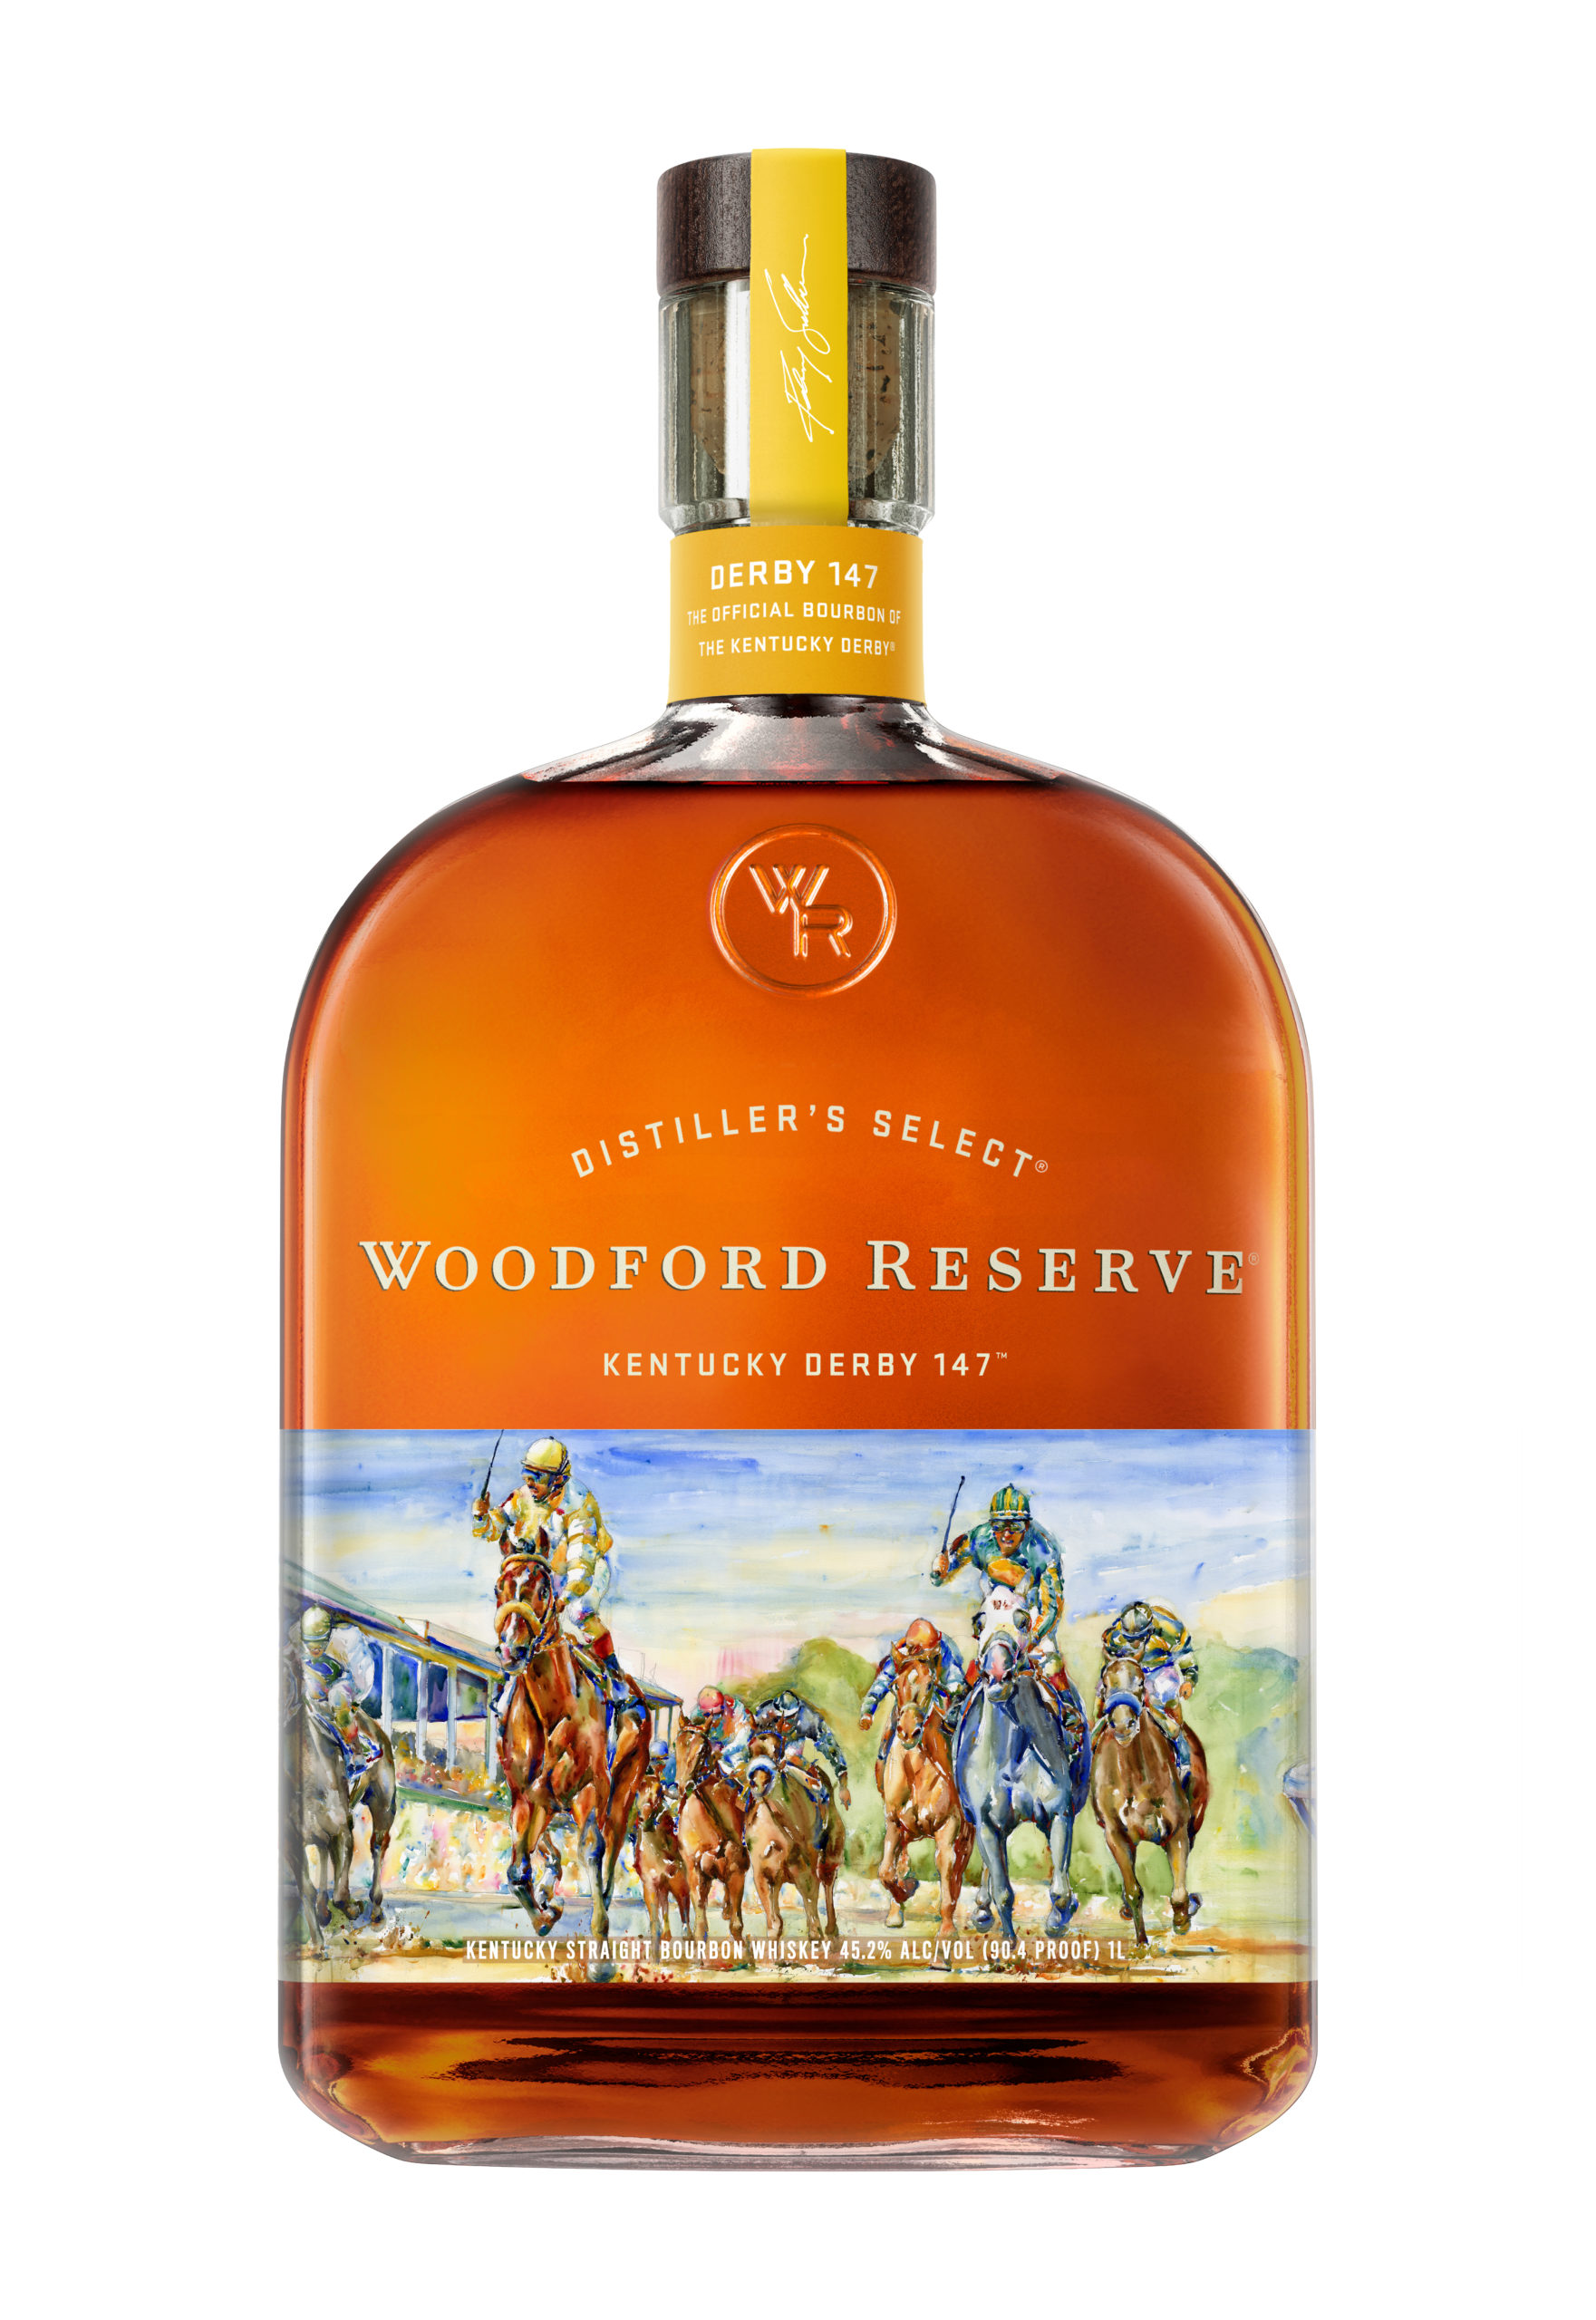 Woodford Reserve Releases 2021 Kentucky Derby Bottle Whiskey Consensus